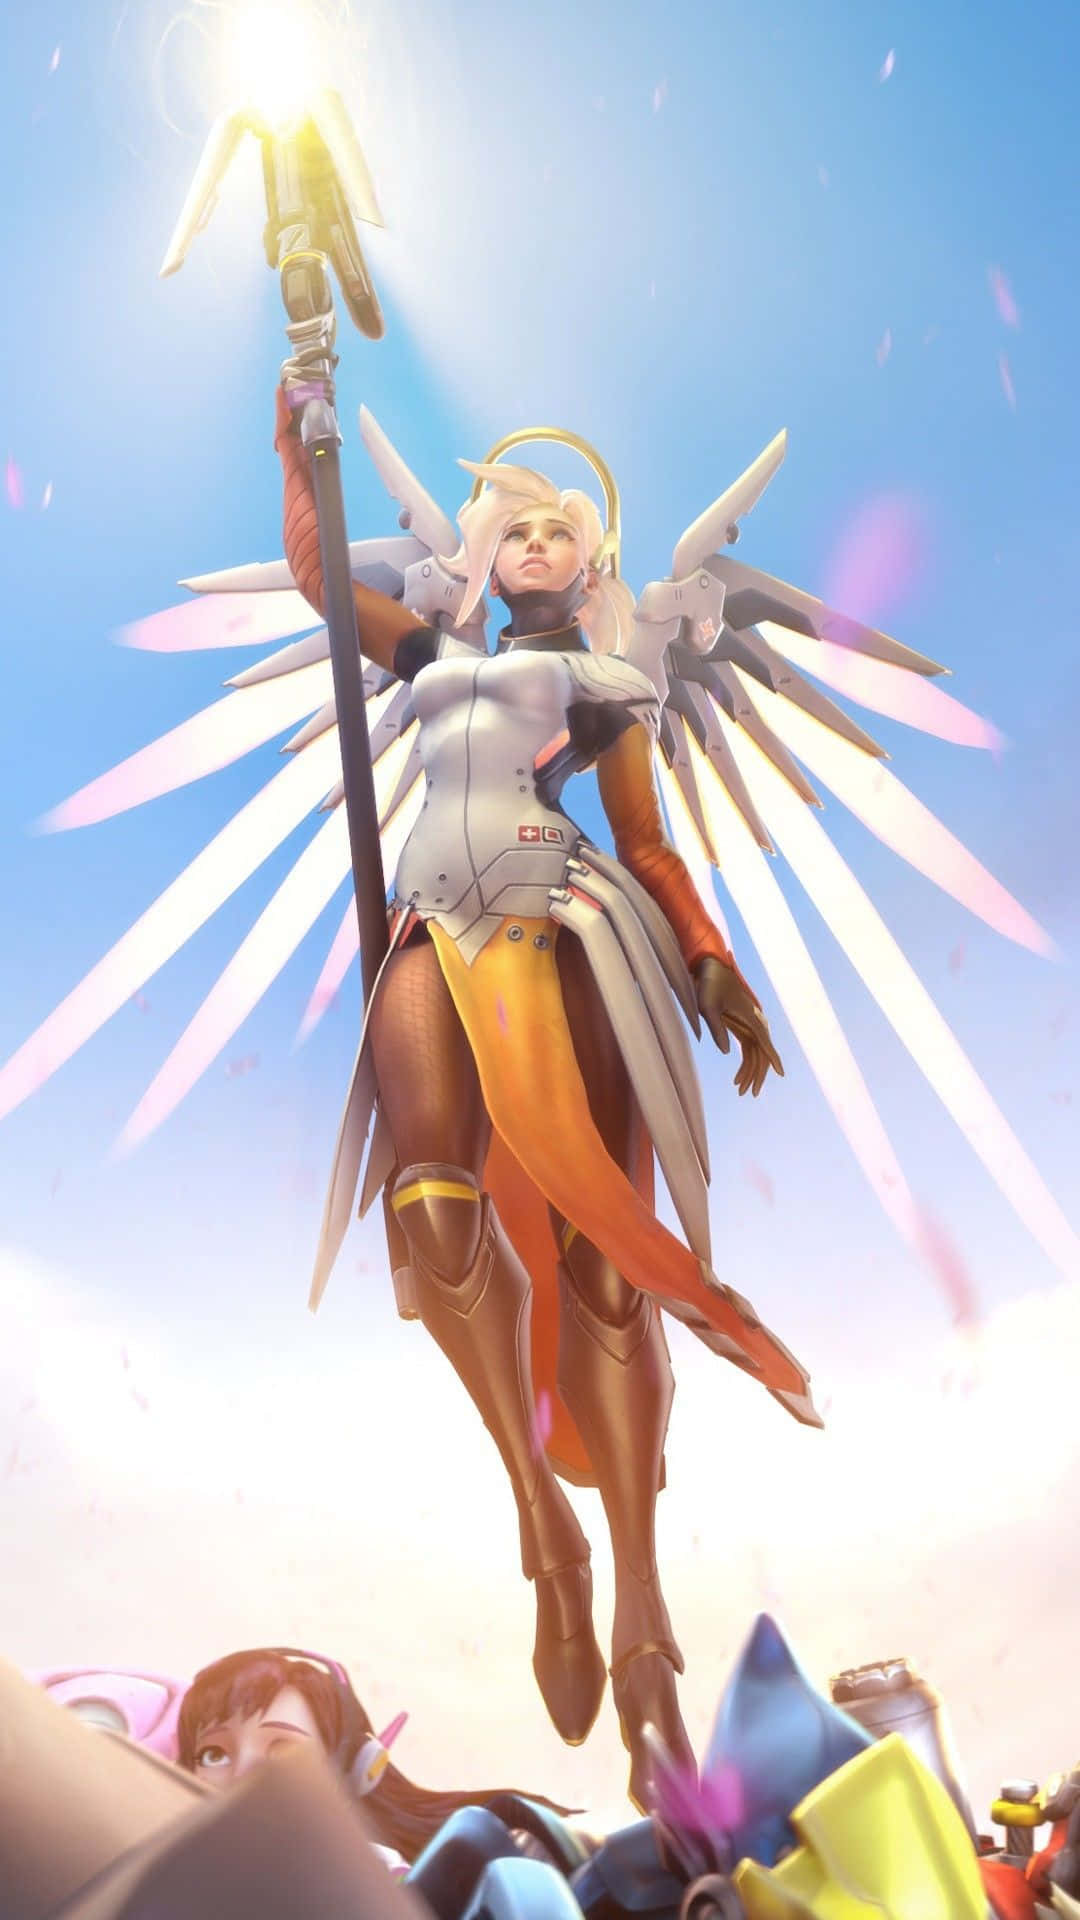 Overwatch's Mercy, The Guardian Angel, Soaring In Action Wallpaper